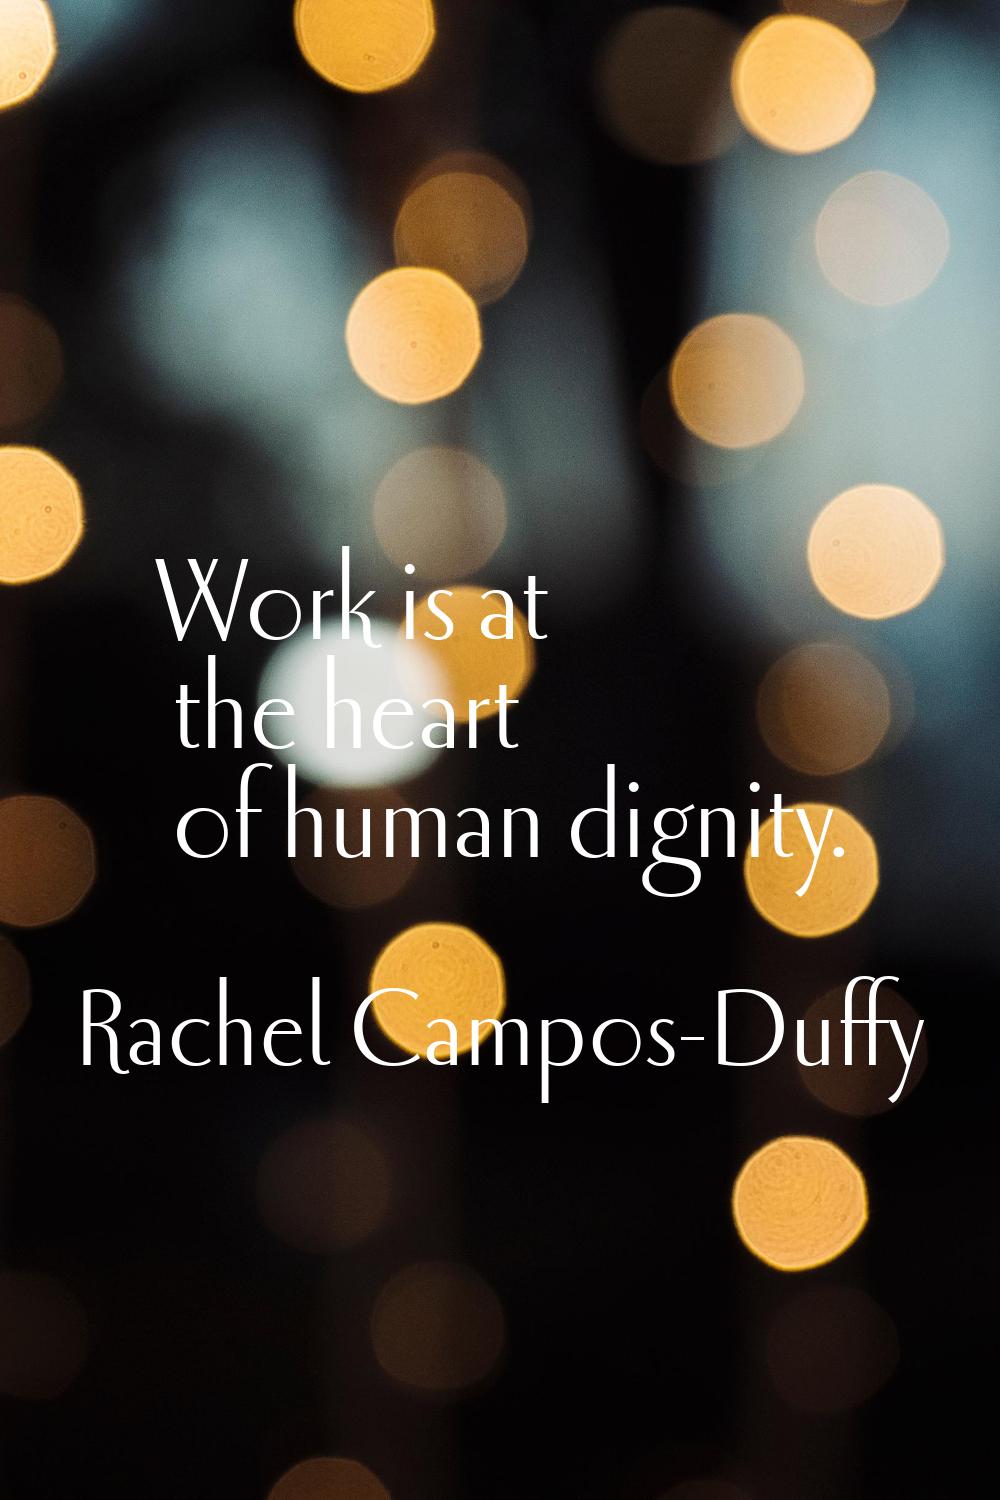 Work is at the heart of human dignity.